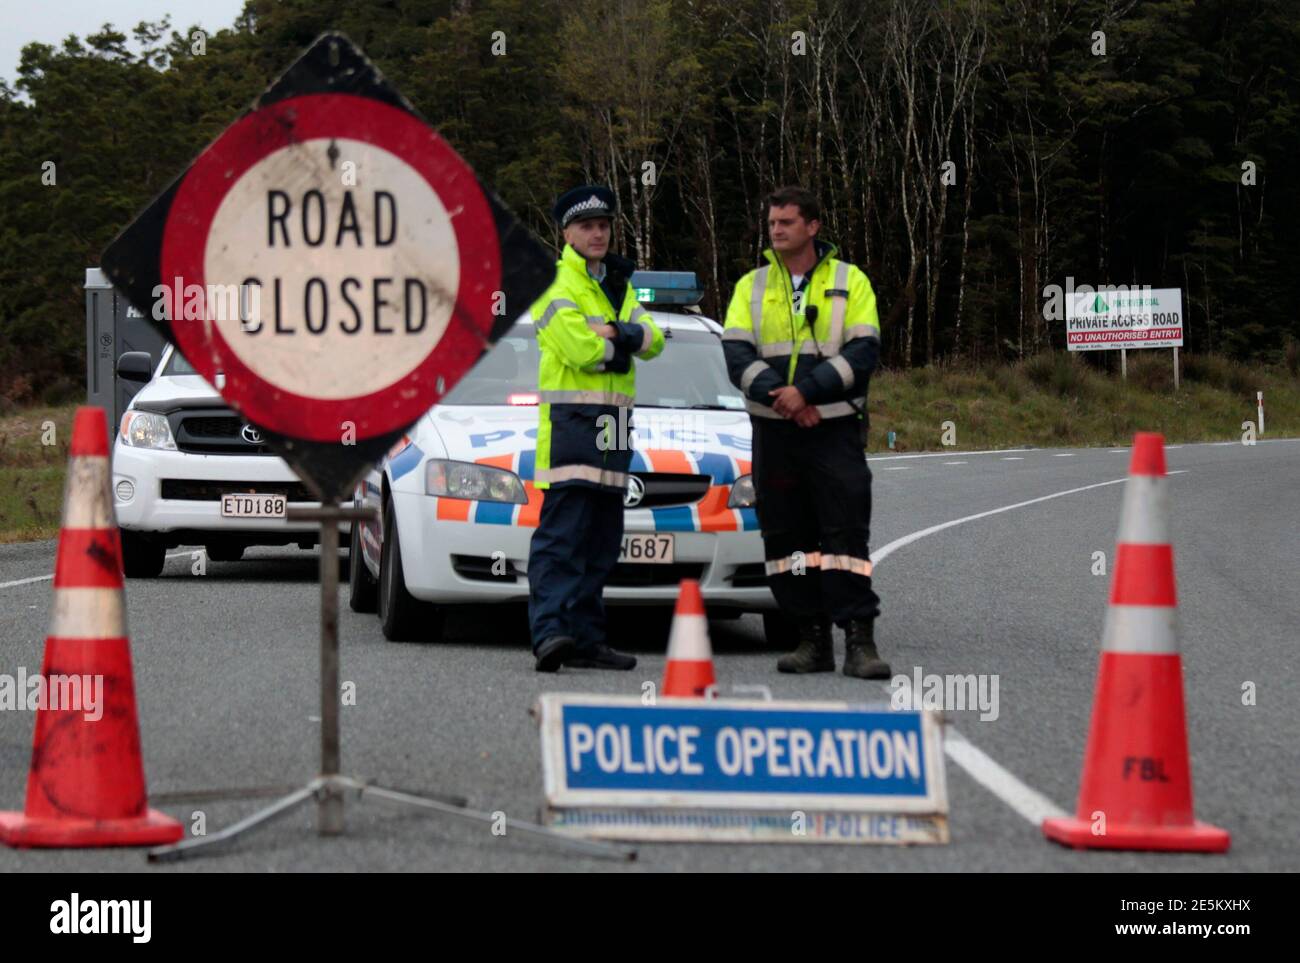 New Zealand policemen stand at a road block on the road leading to the Pike River coal mine November 20, 2010, where 29 miners are trapped following an underground explosion on Friday. New Zealand rescuers have yet to make contact with the trapped miners as fears of lethal gas levels prevented any chance of a rescue on Saturday, 24 hours after the explosion ripped through the remote colliery dug into the side of a mountain.           REUTERS/Tim Wimborne    (NEW ZEALAND - Tags: DISASTER) Stock Photo